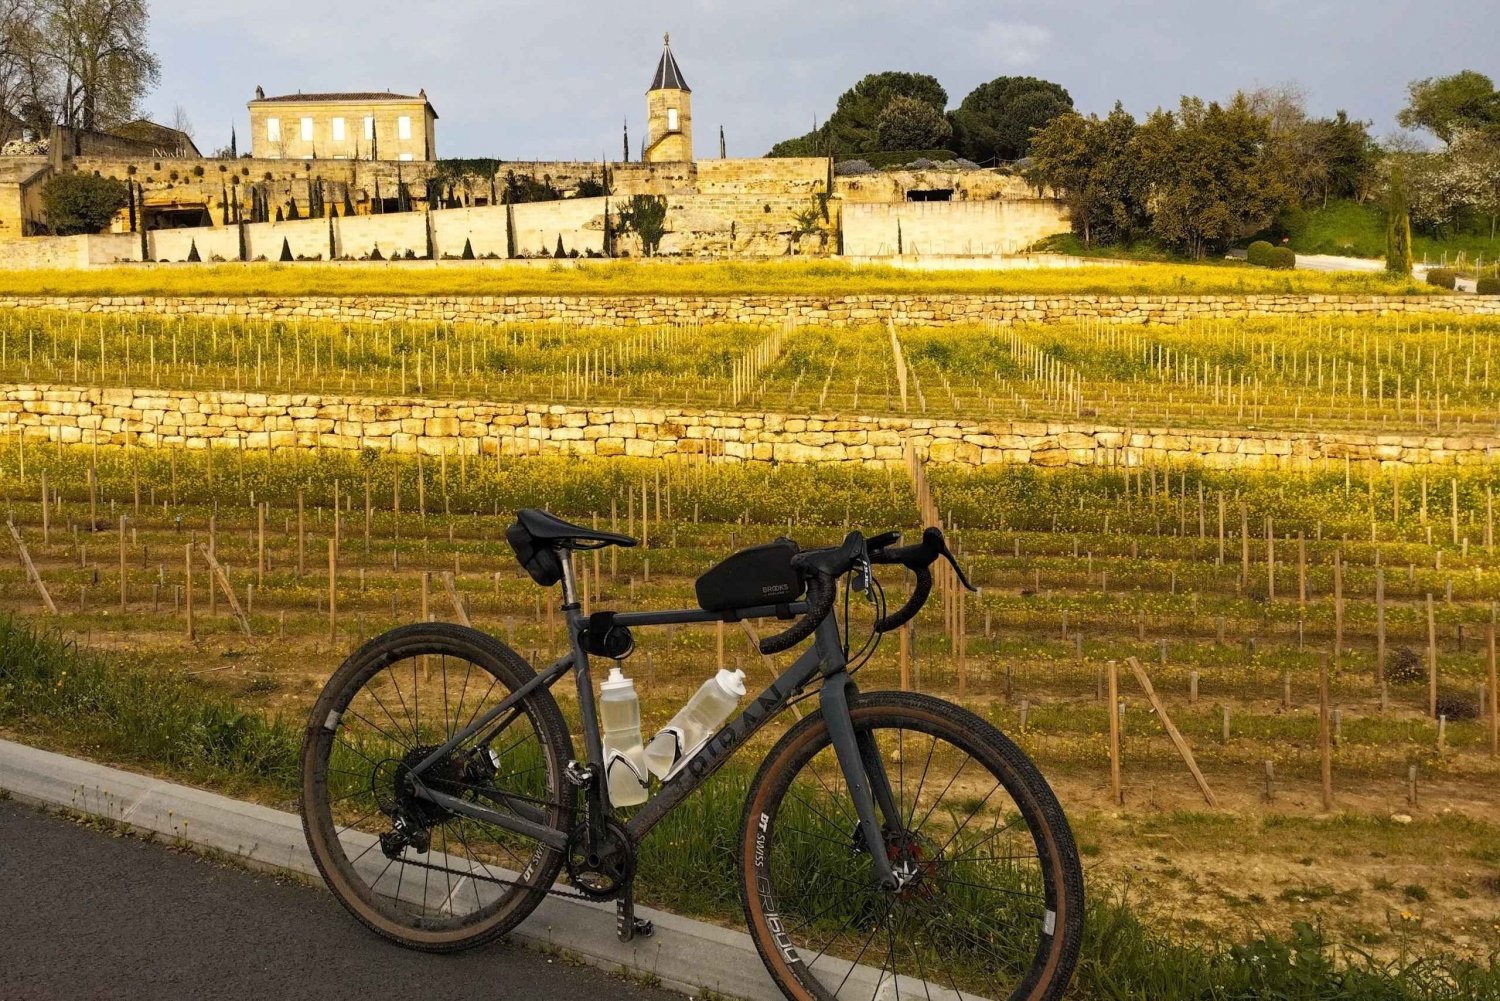 From Bordeaux to Saint Emilion by gravel bike - wine tasting